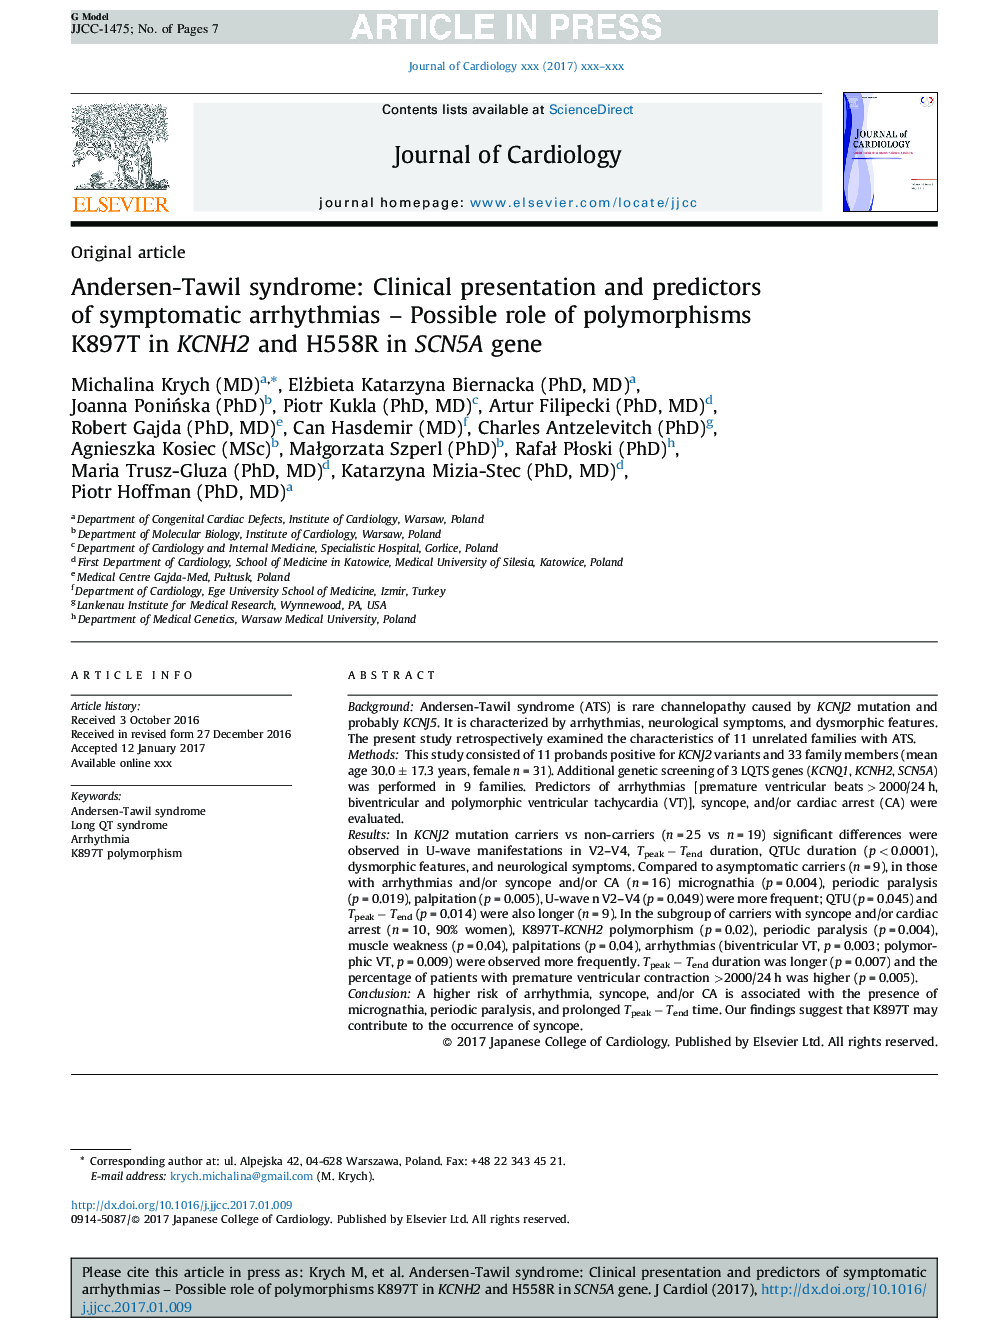 Andersen-Tawil syndrome: Clinical presentation and predictors of symptomatic arrhythmias - Possible role of polymorphisms K897T in KCNH2 and H558R in SCN5A gene